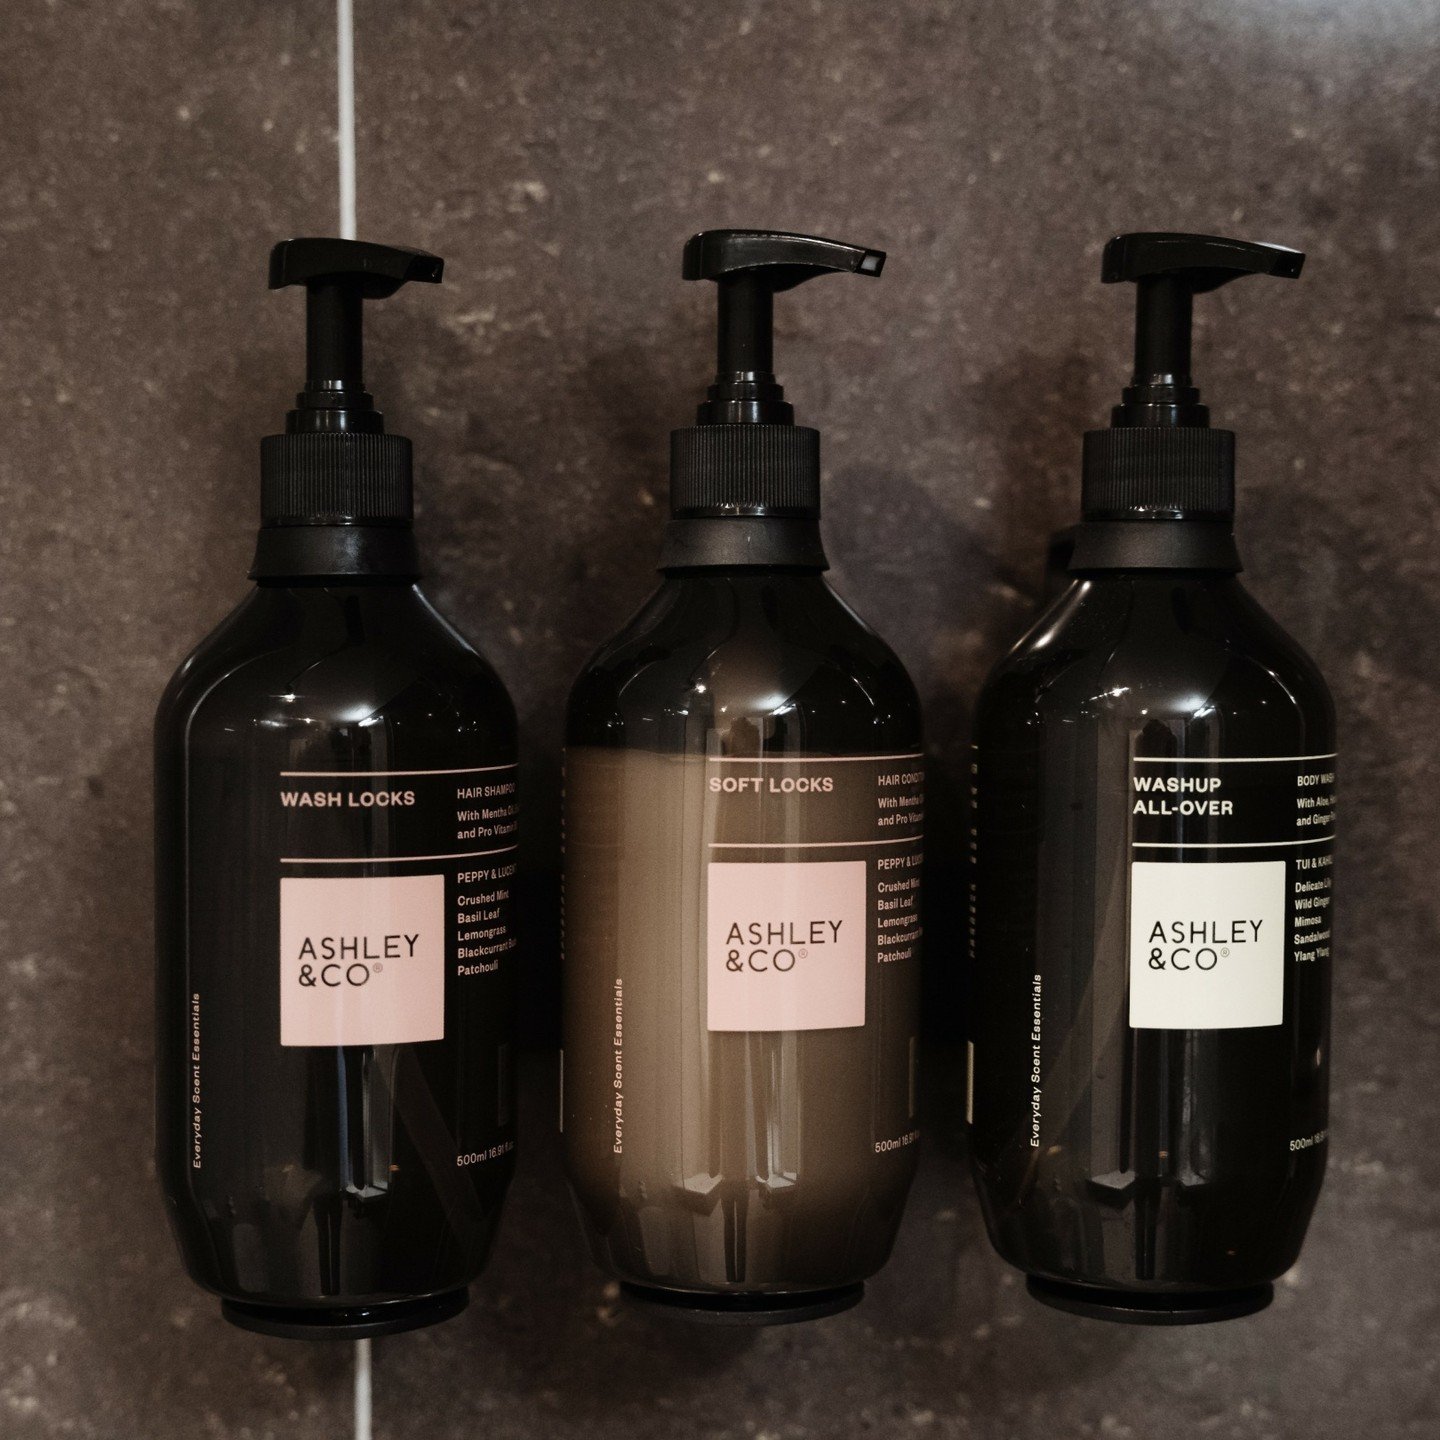 We've said goodbye to single use toiletries and hello to luxurious @ashleyandcosociety refillable bottles 🌎

Taking another stride forward on our sustainability journey.
.
.
.
#sustainability #reuse #reducewaste #ashleyandcosociety #ashleyandco #hot